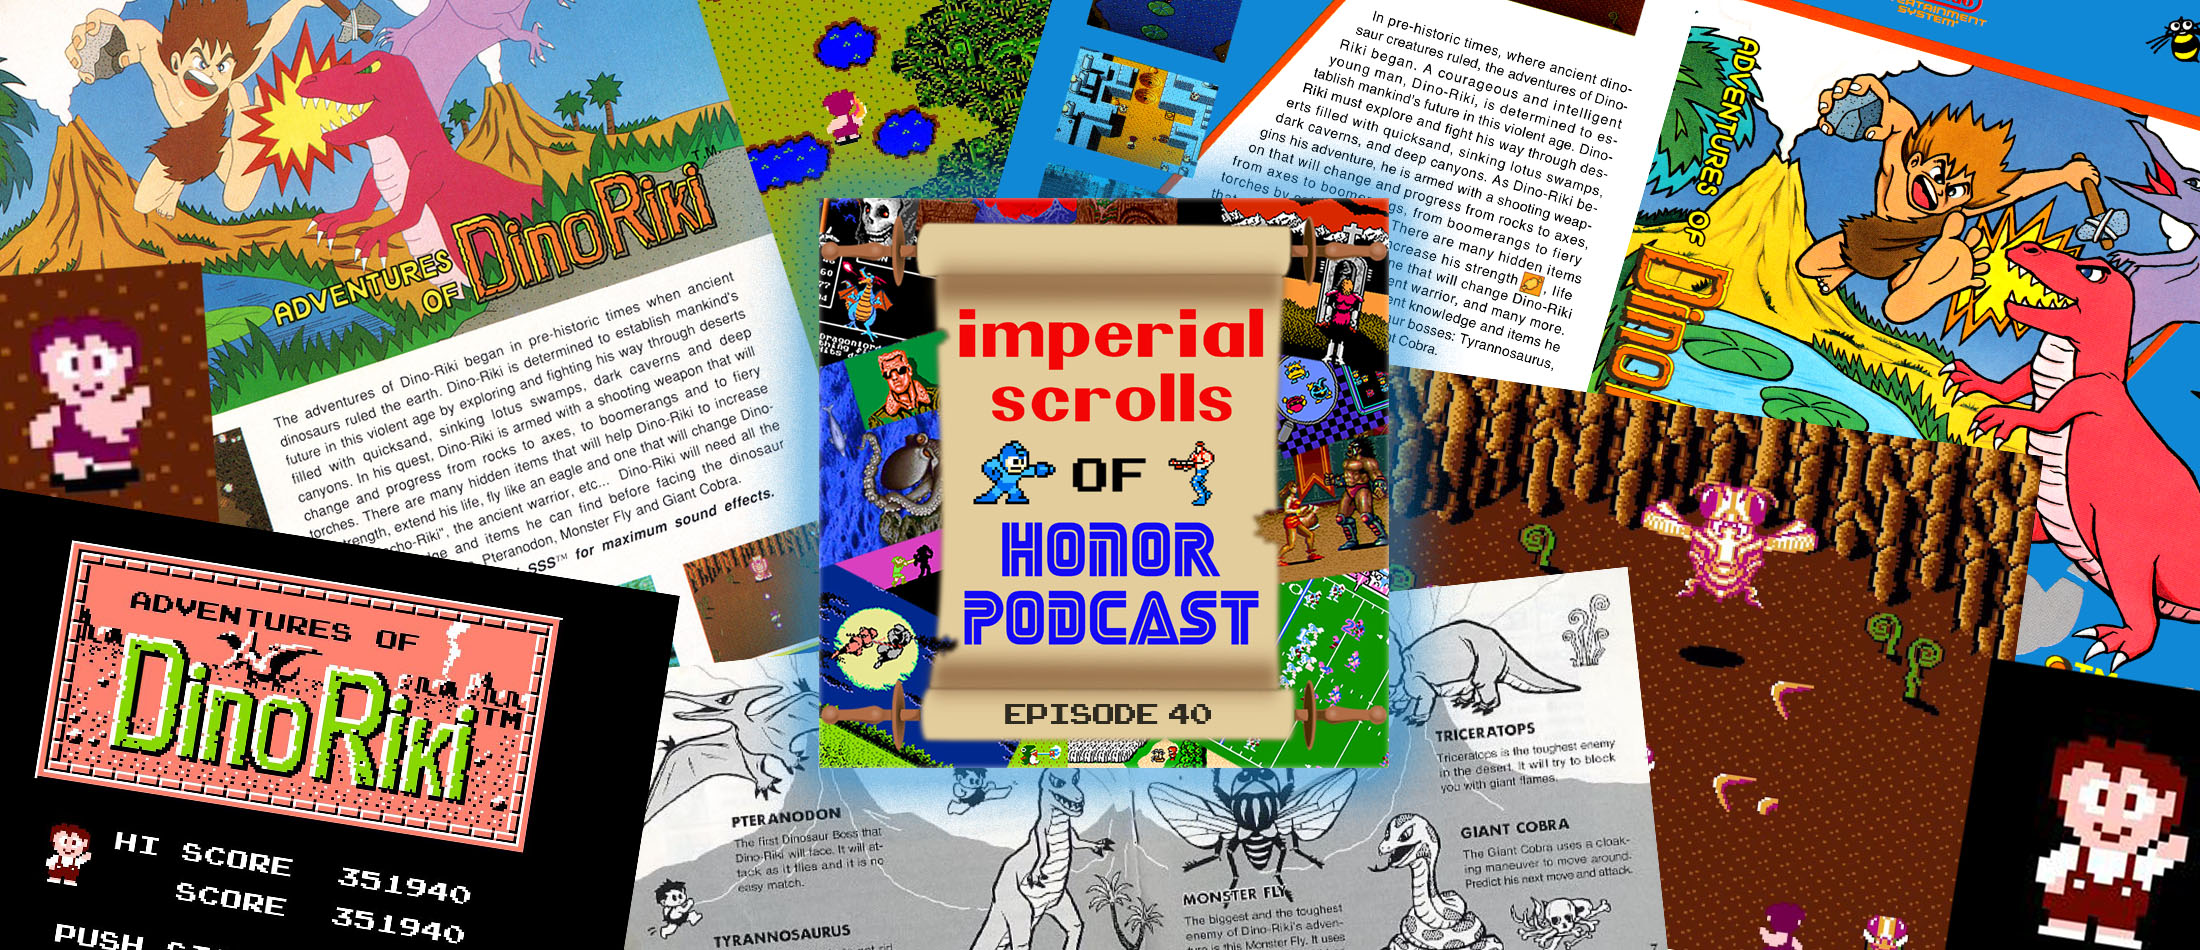 Imperial Scrolls of Honor Podcast - Episode 40 - Adventures of Dino Riki